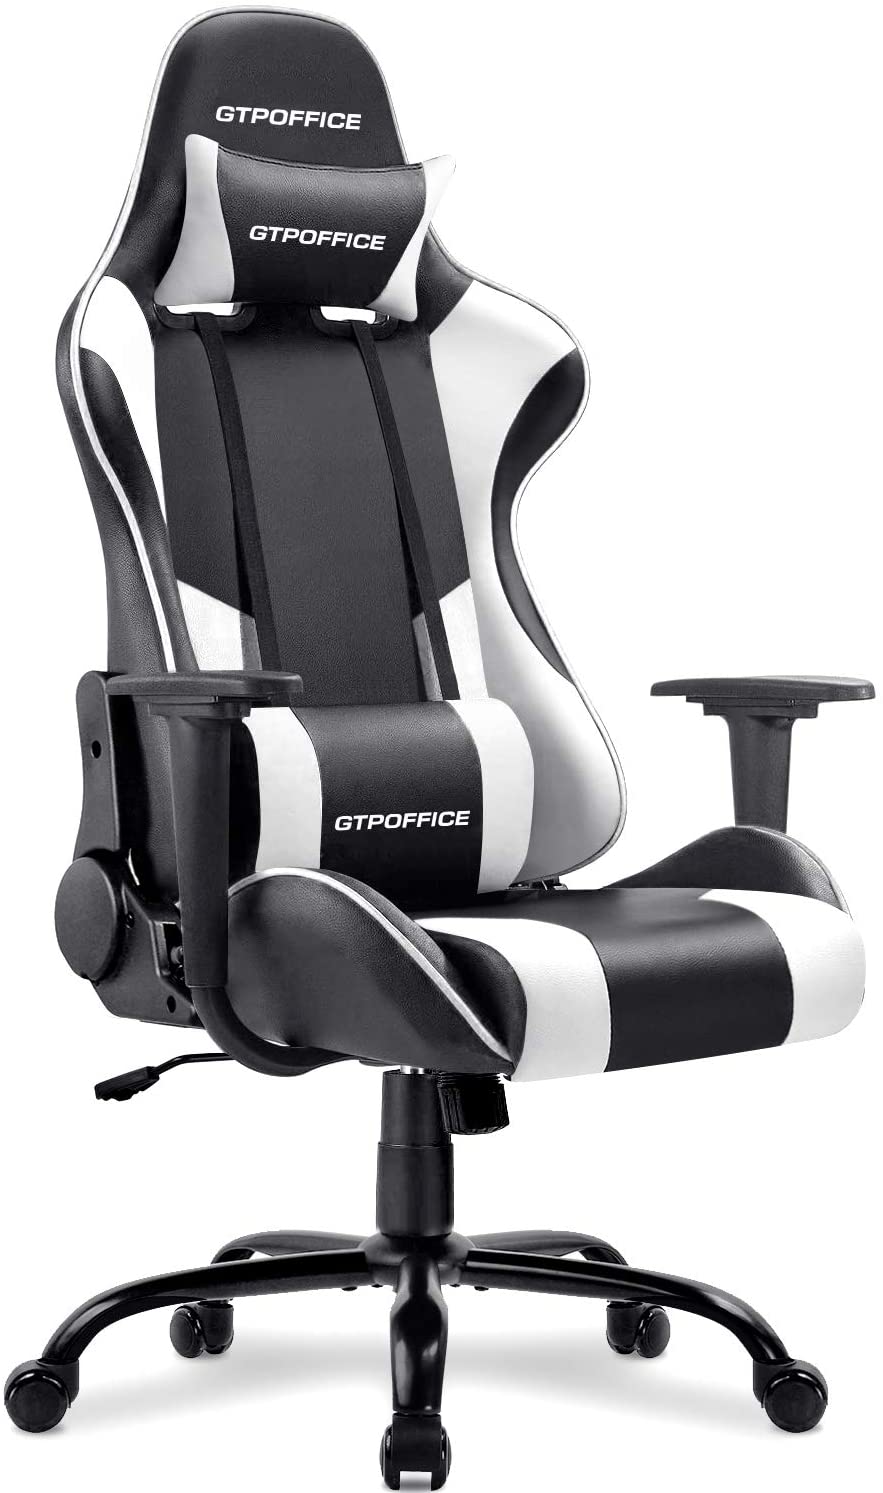 Gtracing-Gtpoffice Gaming Chair Massage Office Computer Chair for $99.99 + 9.99